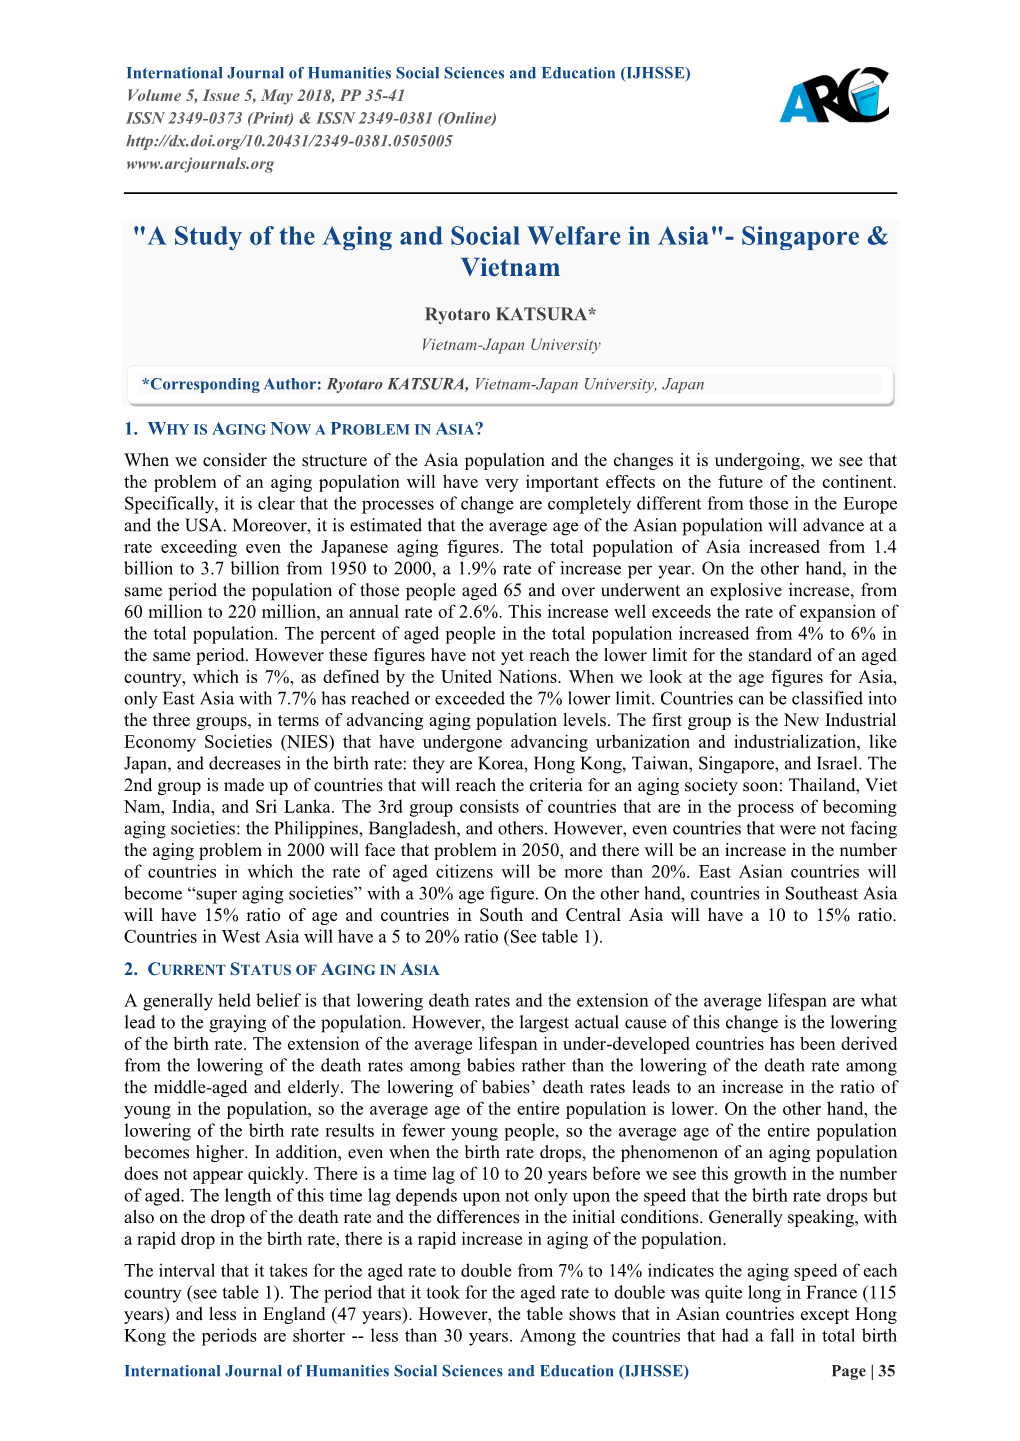 A Study of the Aging and Social Welfare in Asia"- Singapore & Vietnam